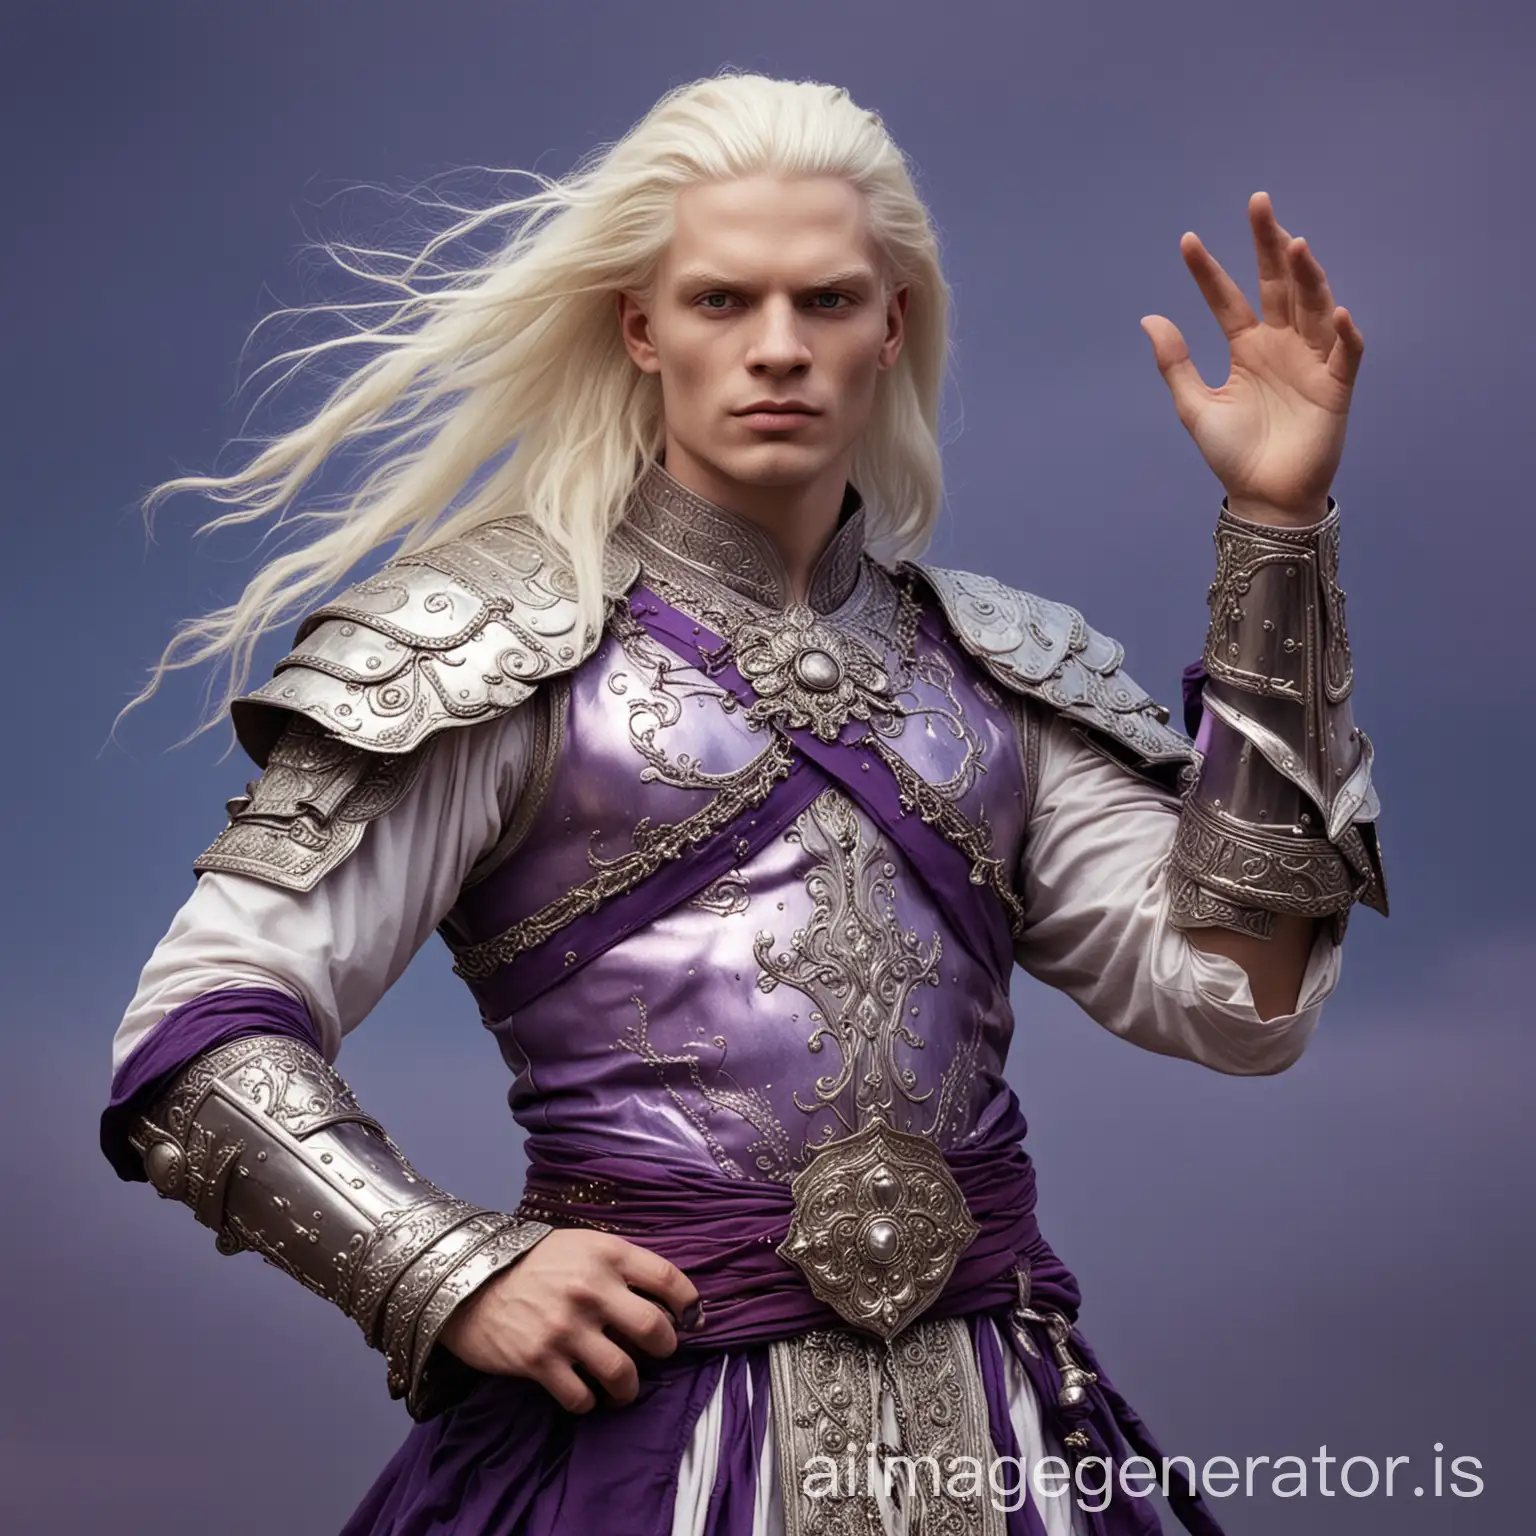 Majestic-Albino-Warrior-Ancient-Violet-Armored-Man-with-Violet-Scepter